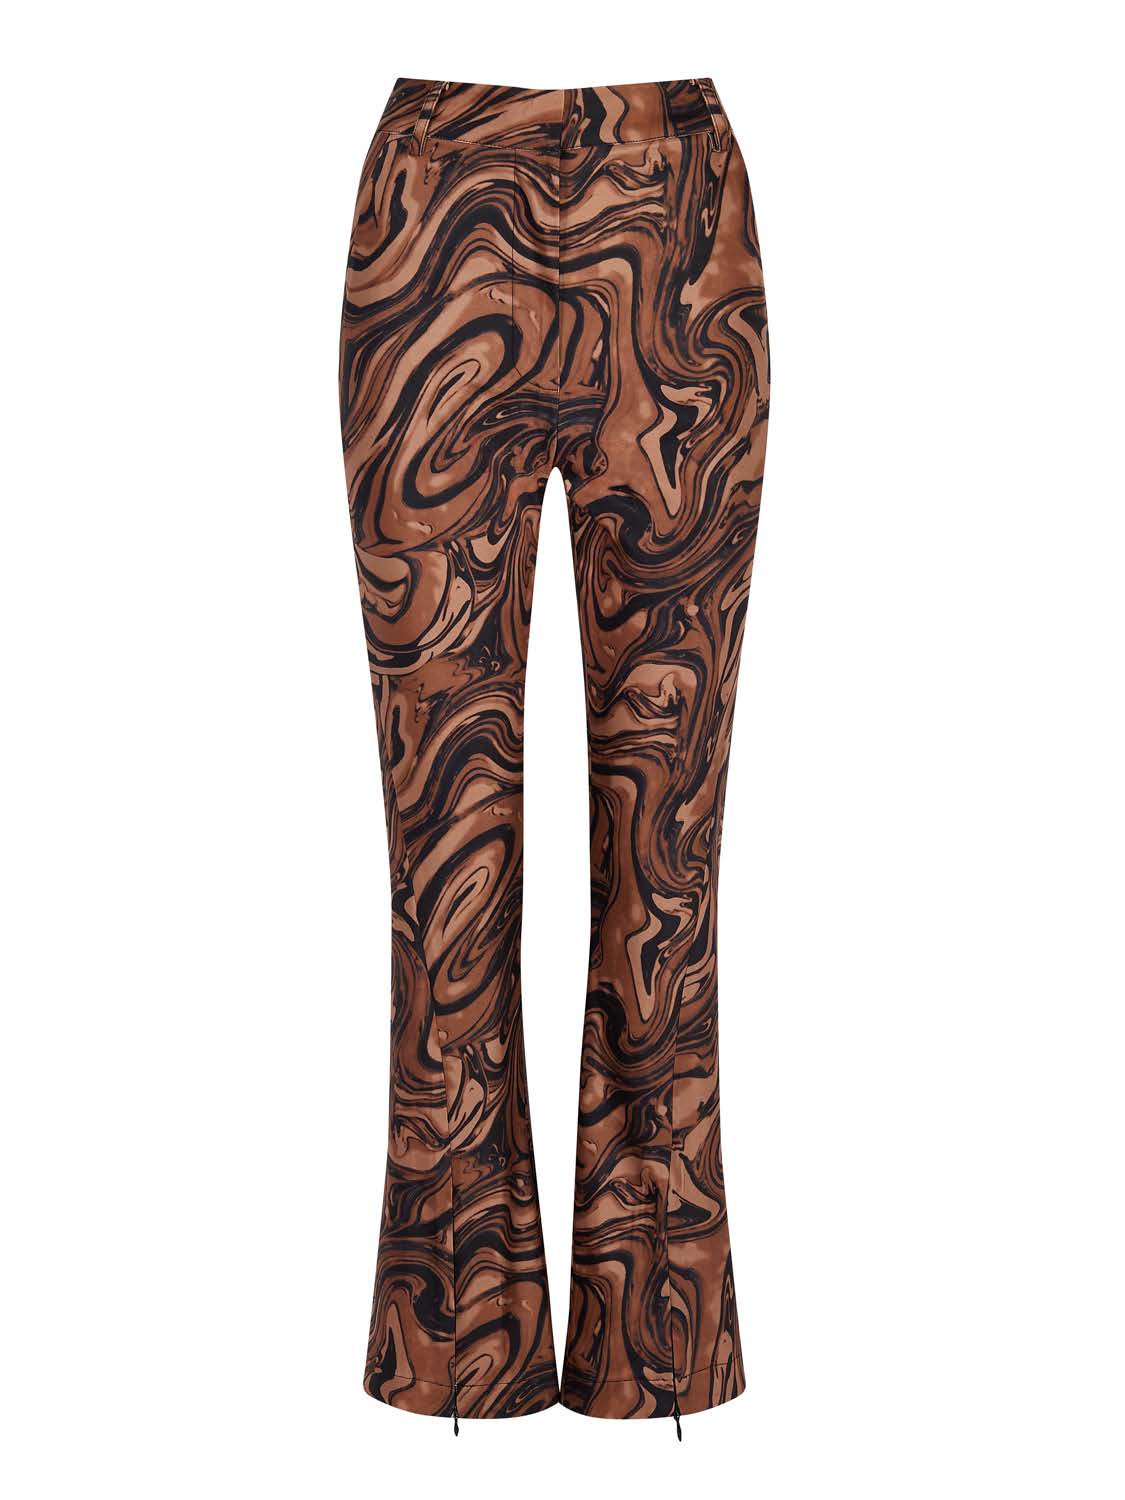 Brown stretchy high waisted flared trousers with an abstract print from House of sunny